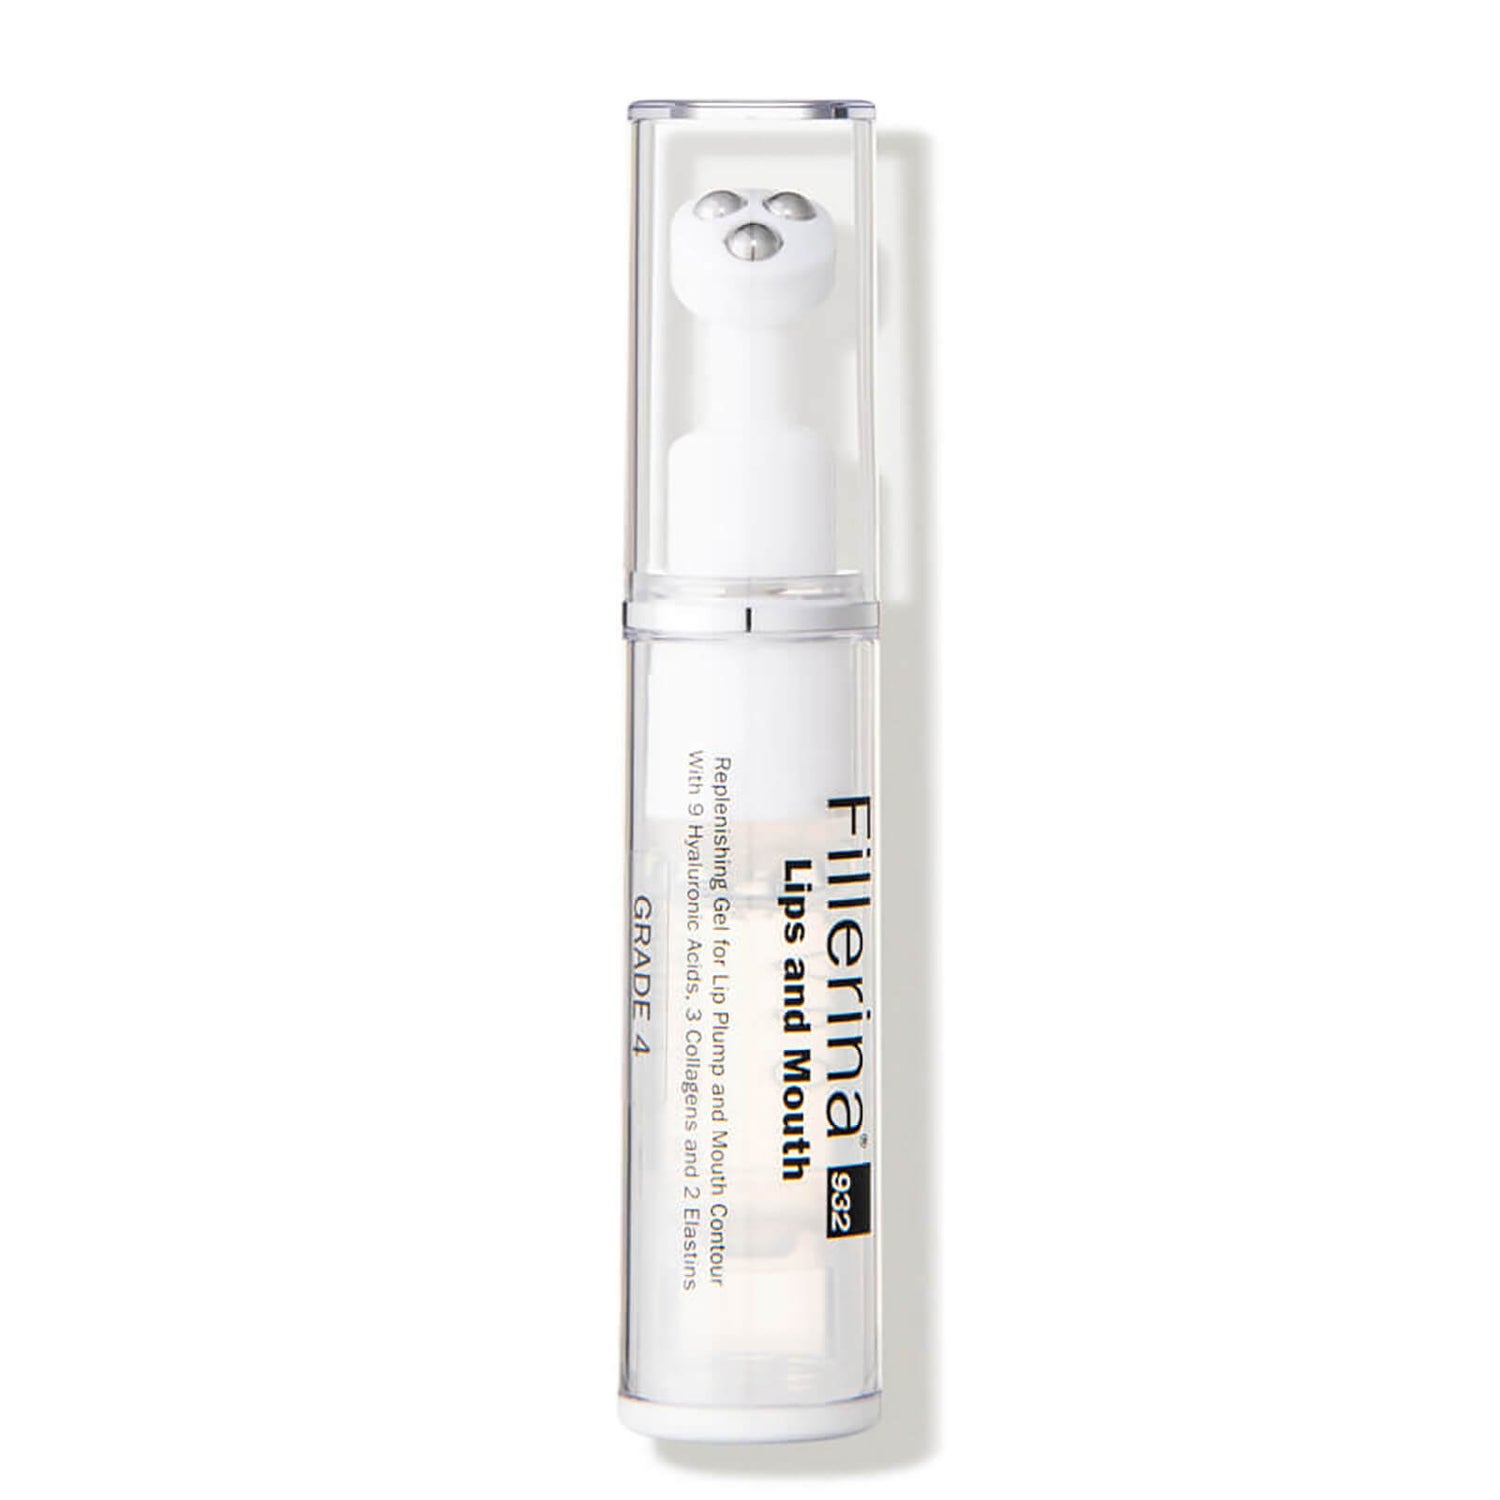 Fillerina 932 Lips and Mouth Treatment 0.24oz - Grade 4